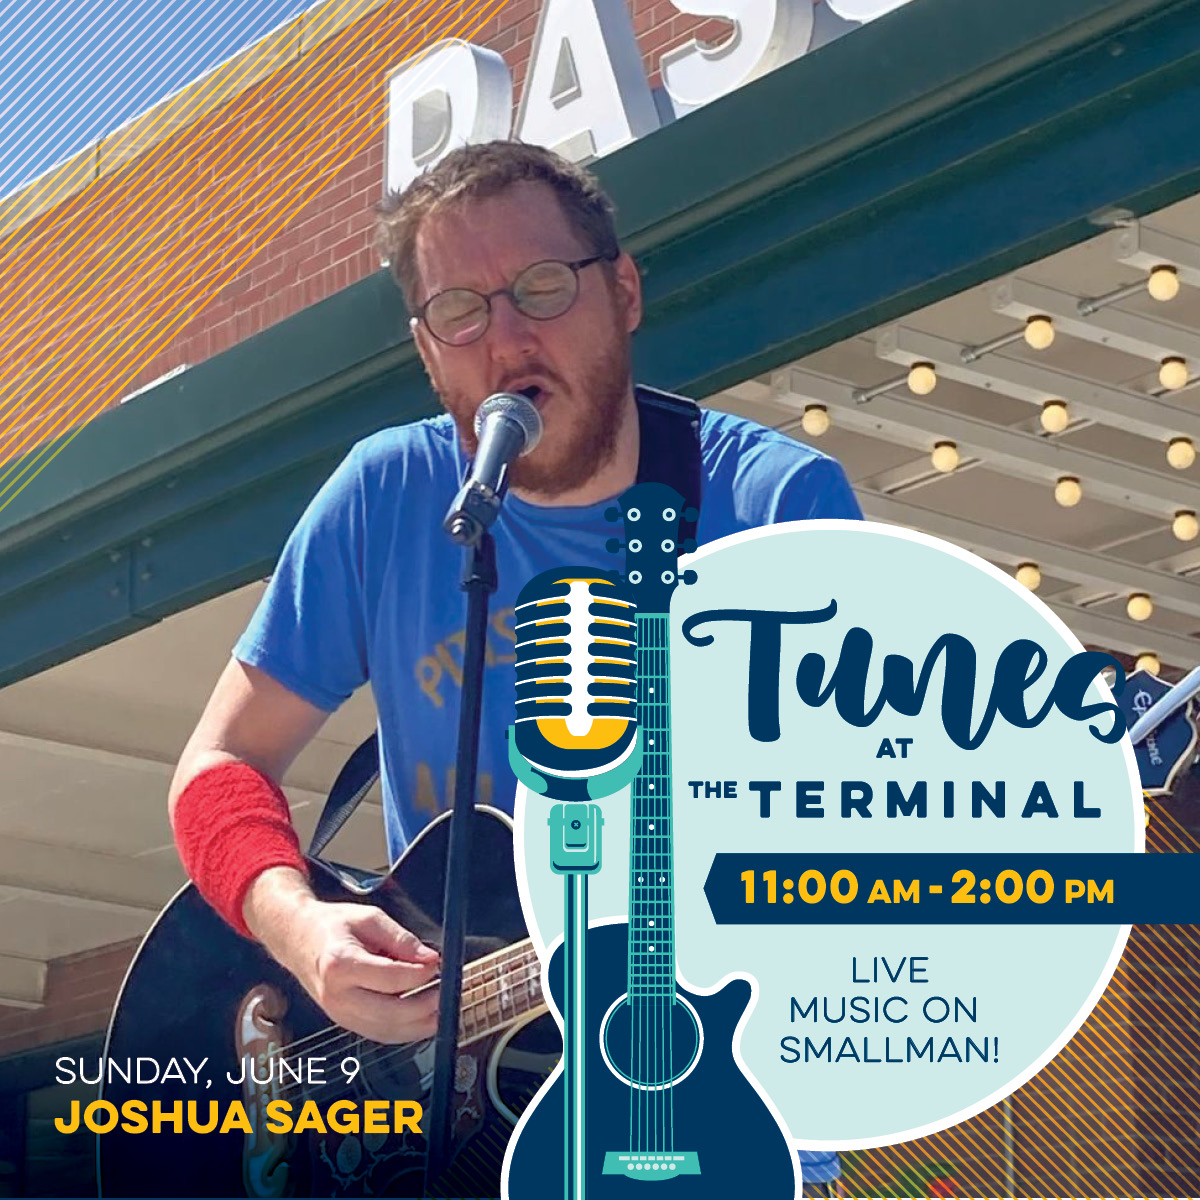 Joshua Sager will be performing at the Terminal in Strip District on June 9th from  11am - 2pm